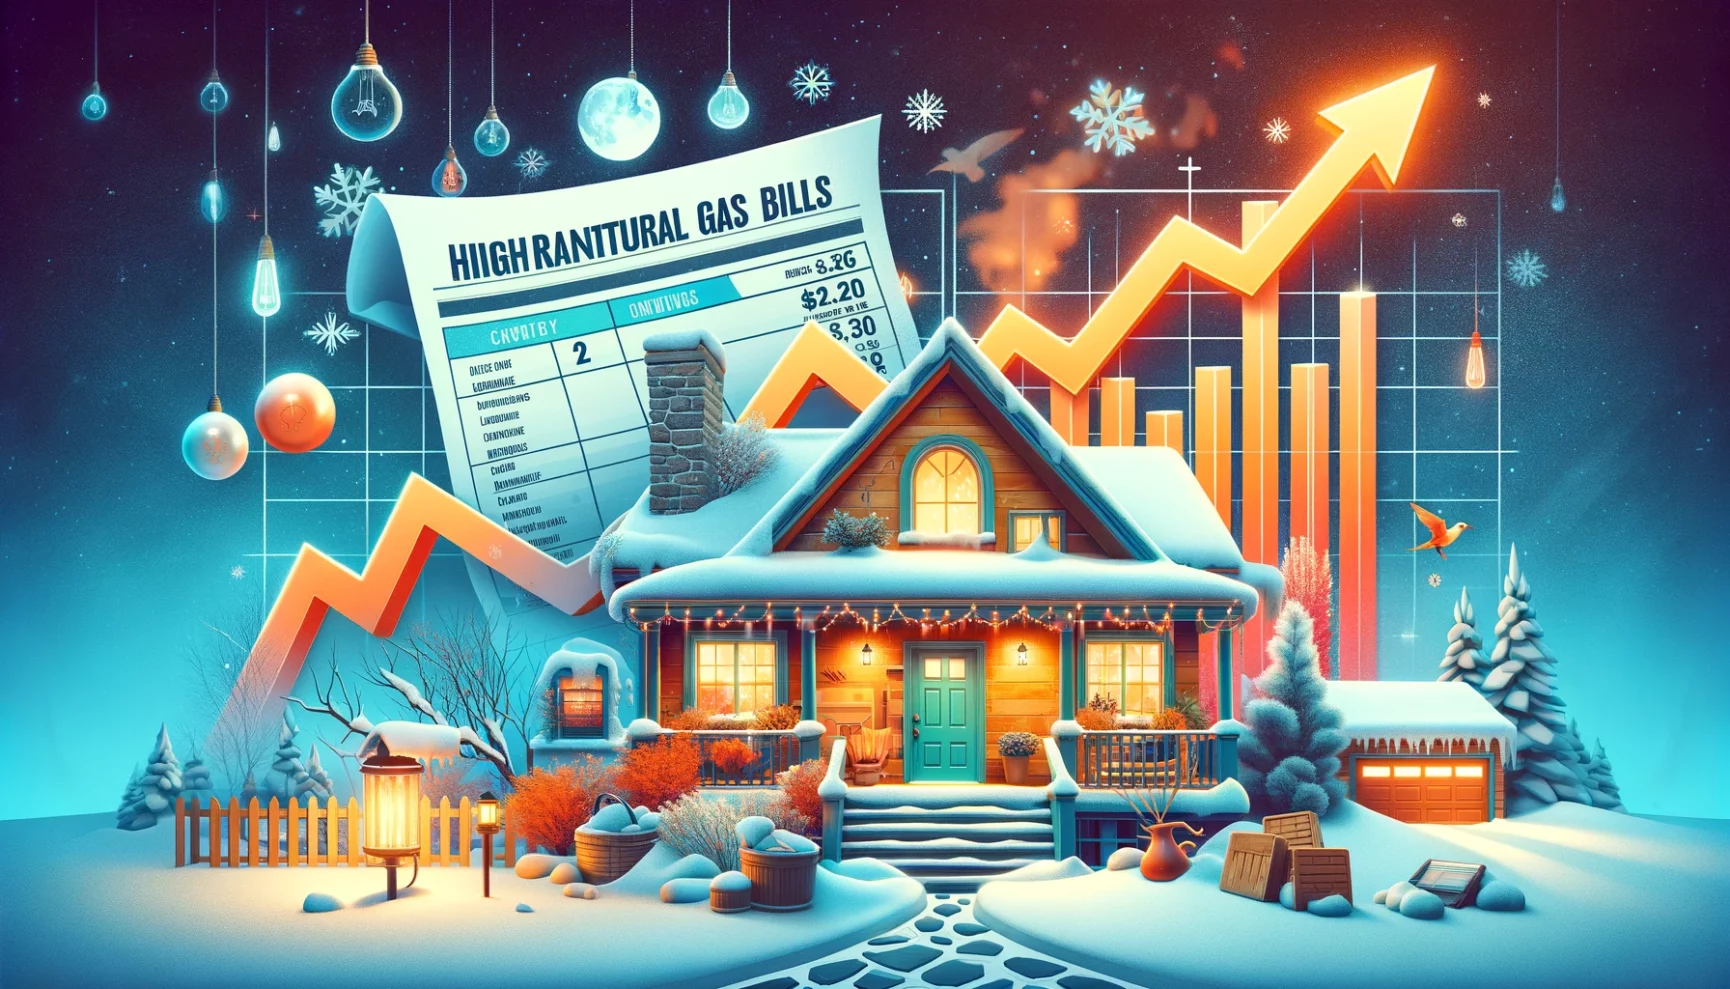 An illustration of a house with snow and a graph depicting natural gas bills in the USA for home heating.